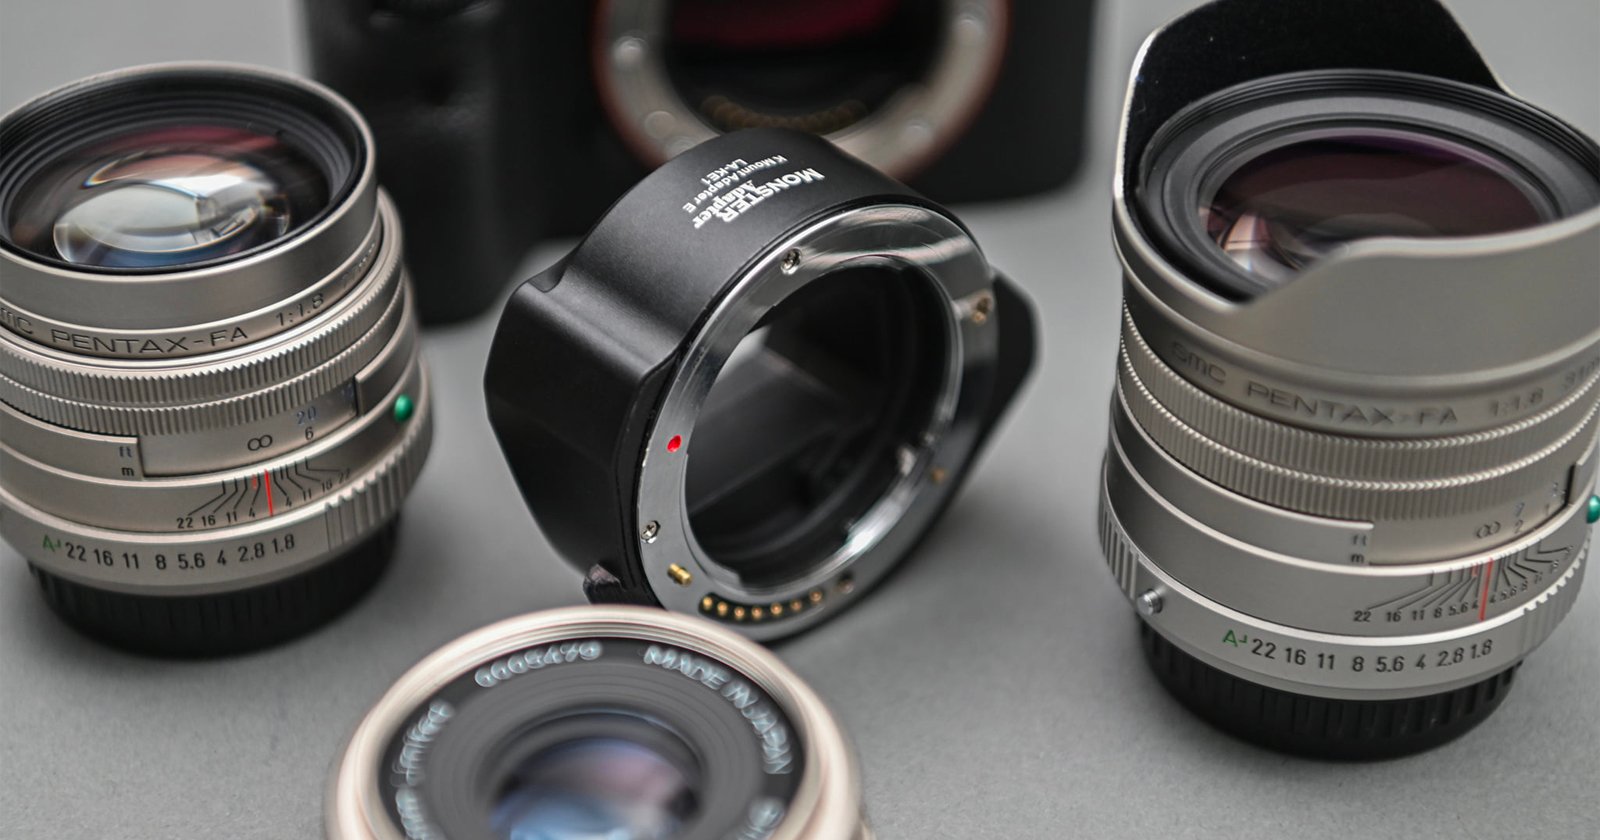 Upcoming Adapter Brings Pentax K Glass to Sony E-Mount, AF Included